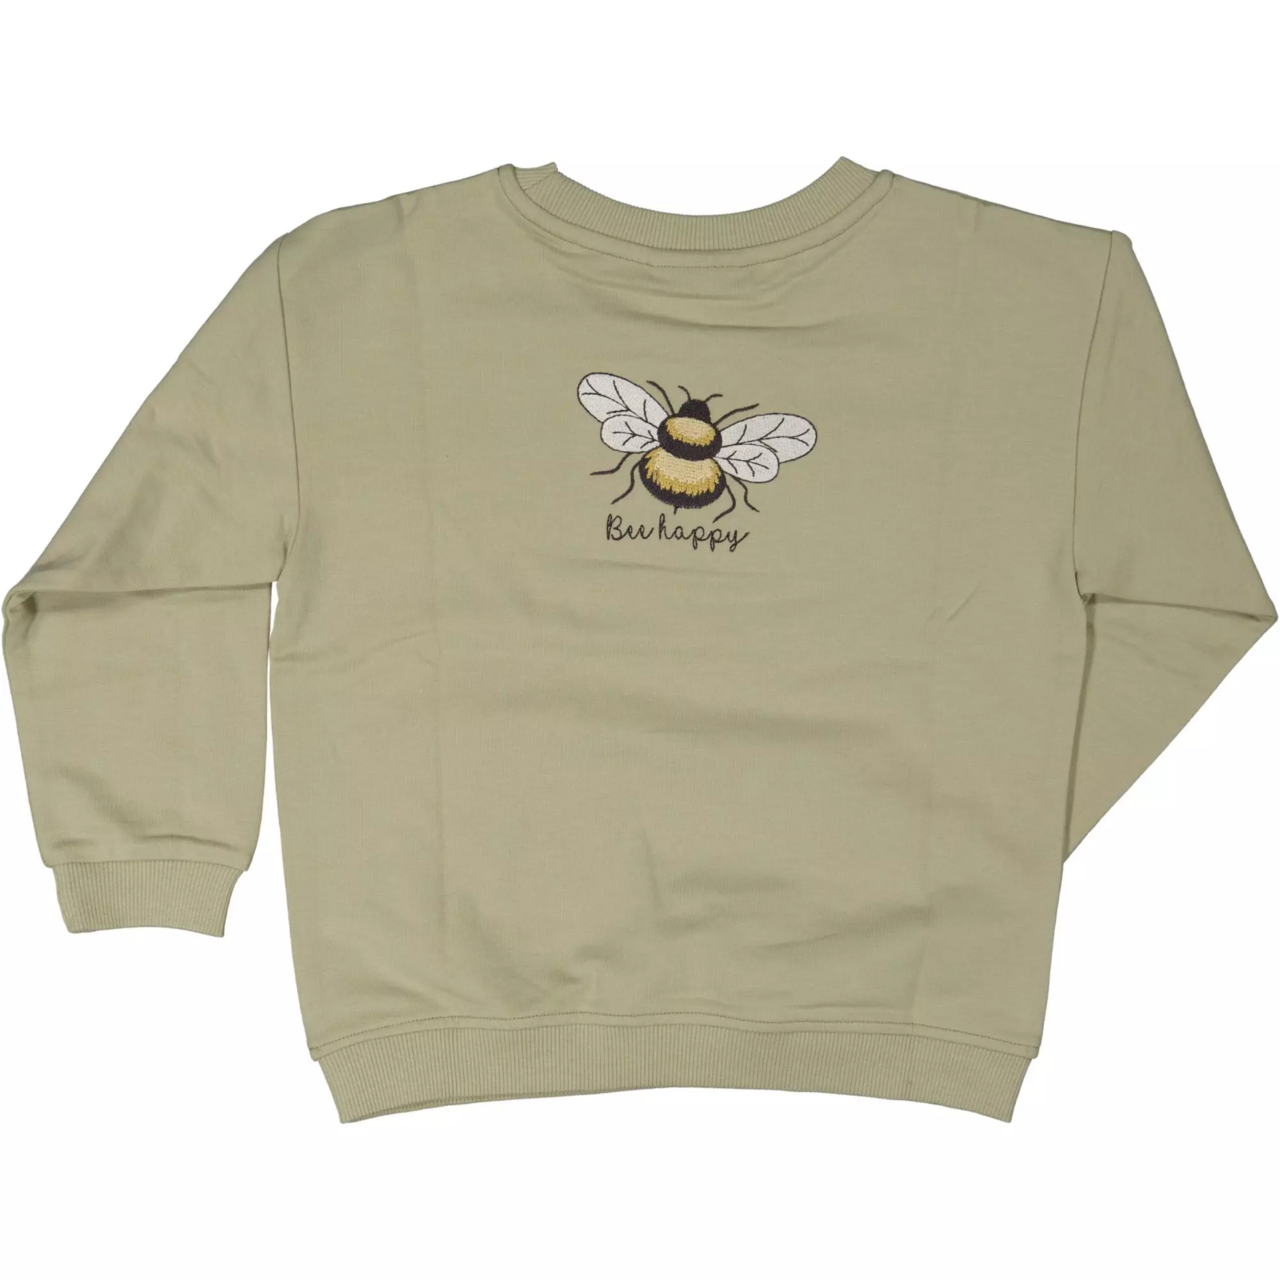 College sweater Olive 86/92